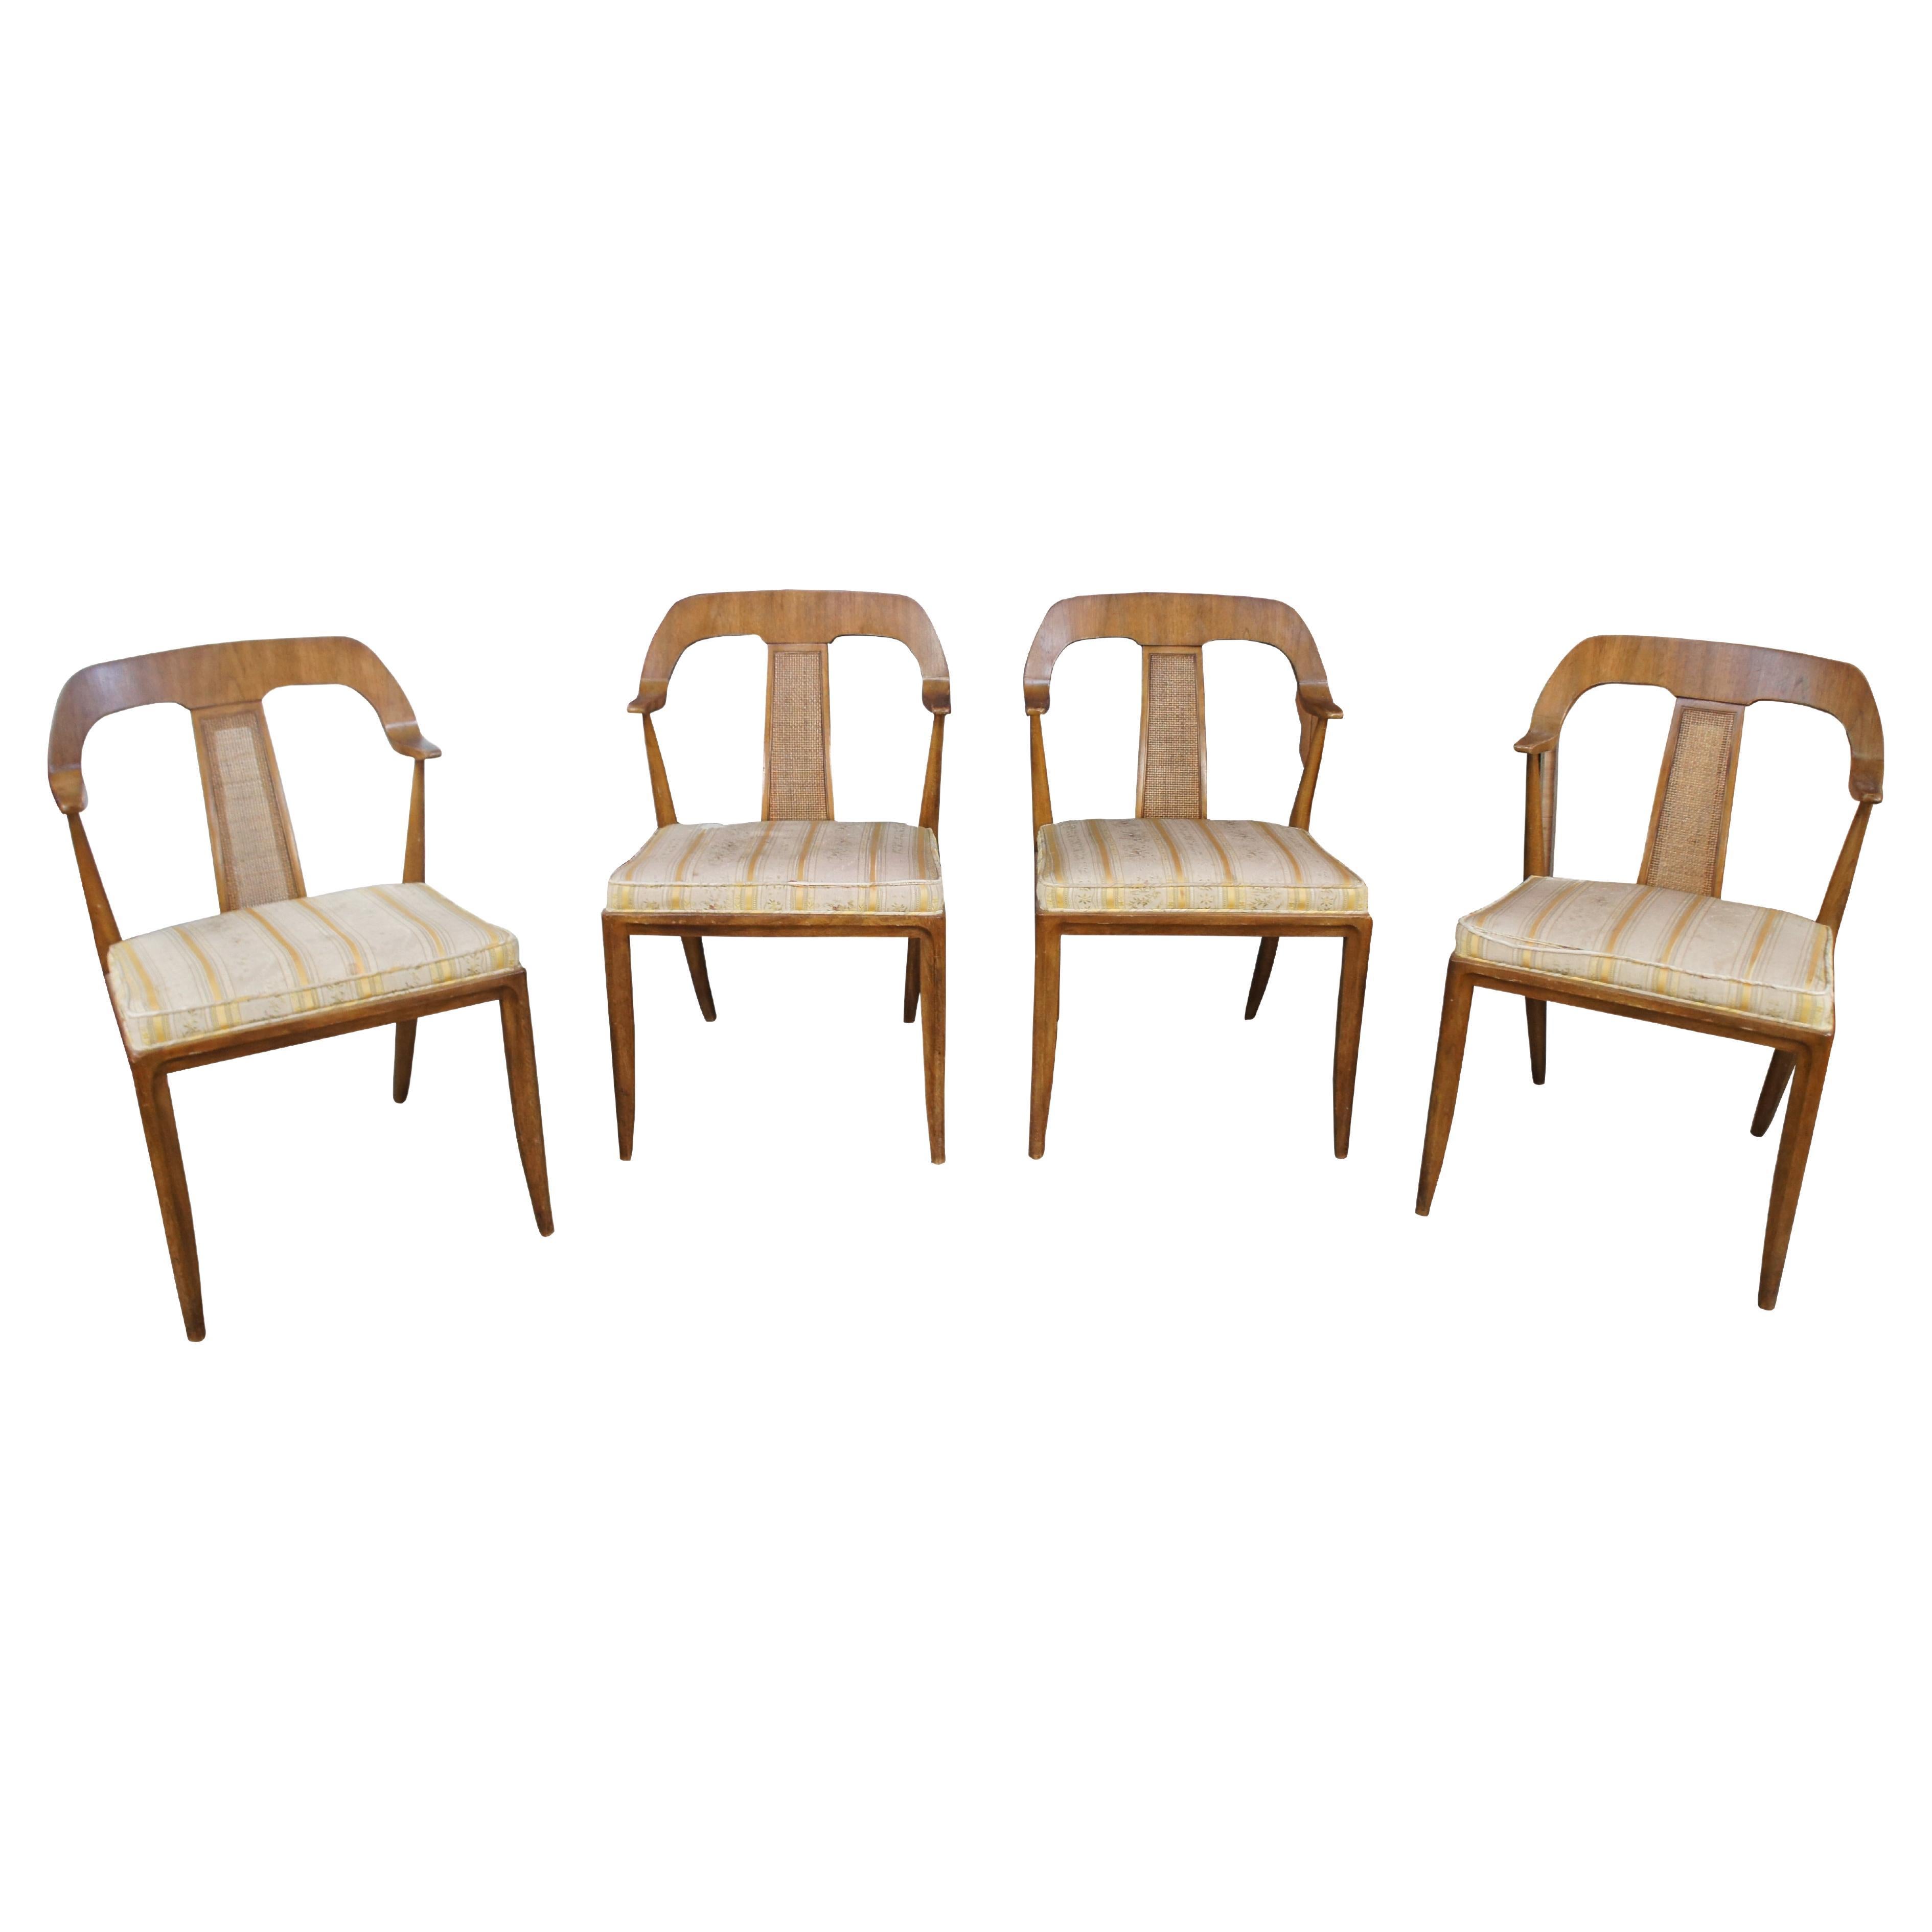 4 Michael Taylor Tomlinson Sophisticate Walnut Dining Chairs Mid Century Modern